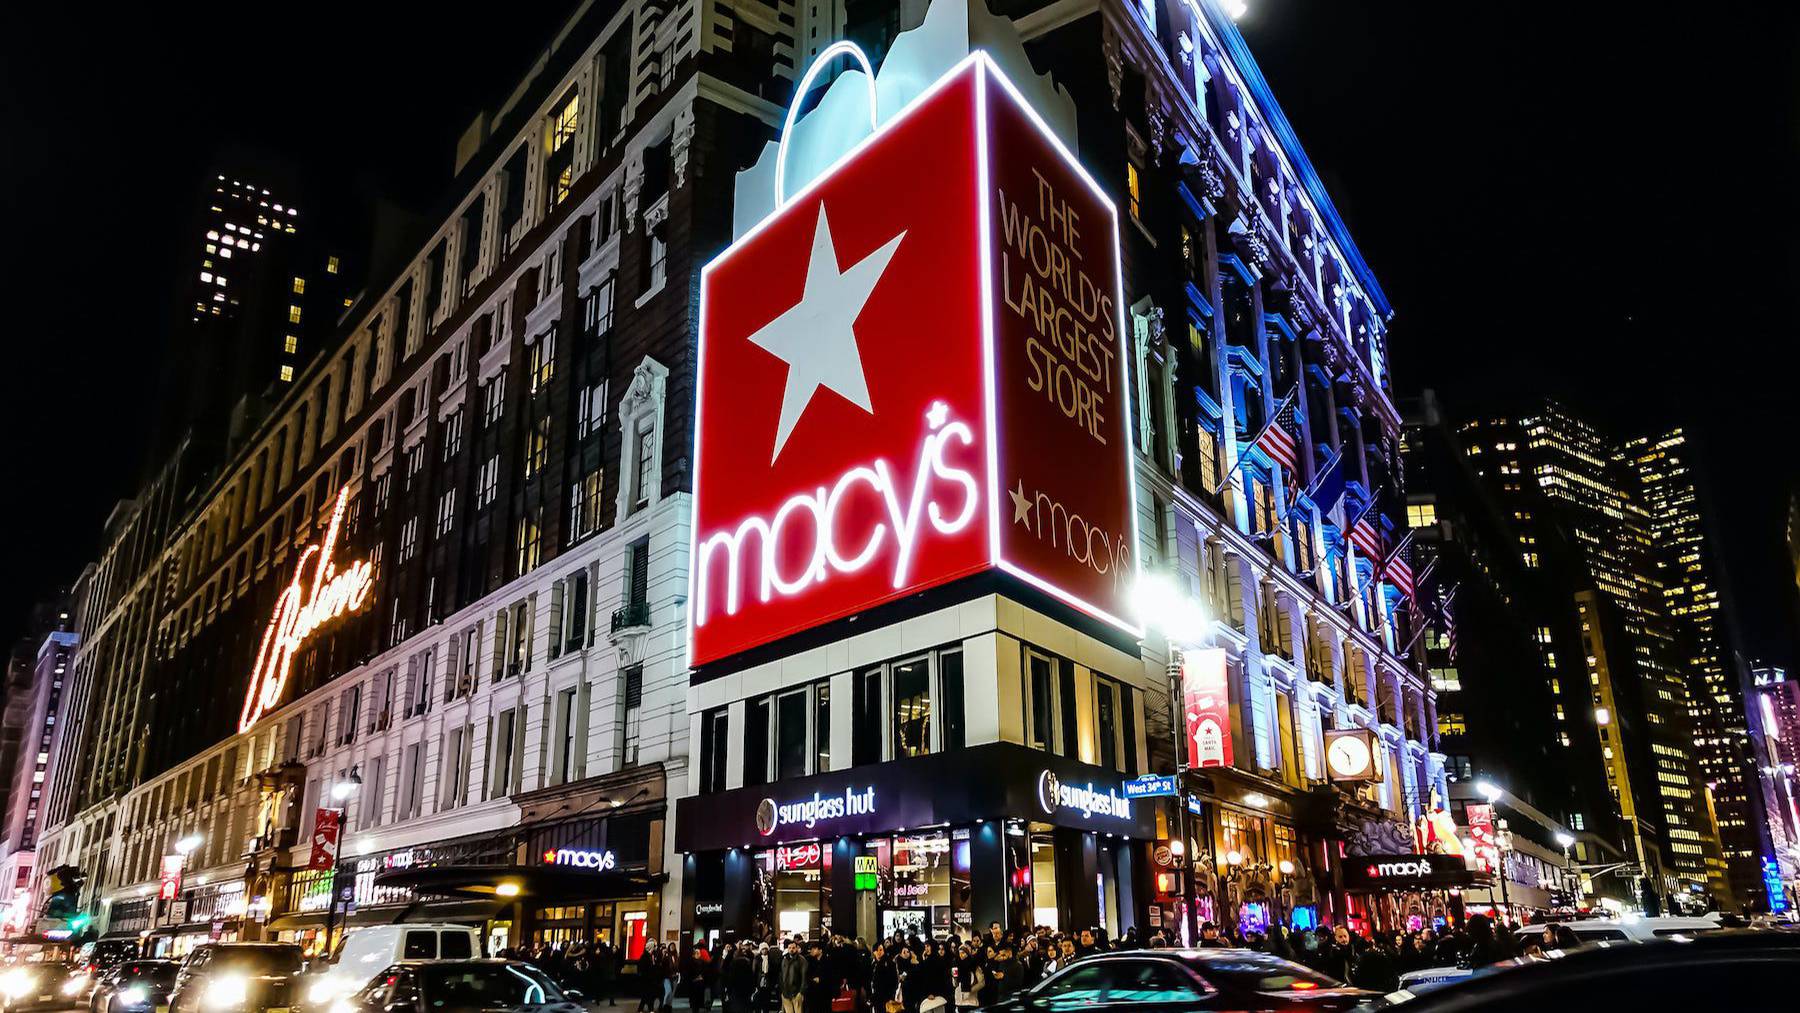 Macy's Herald Square flagship department store in Midtown Manhattan.